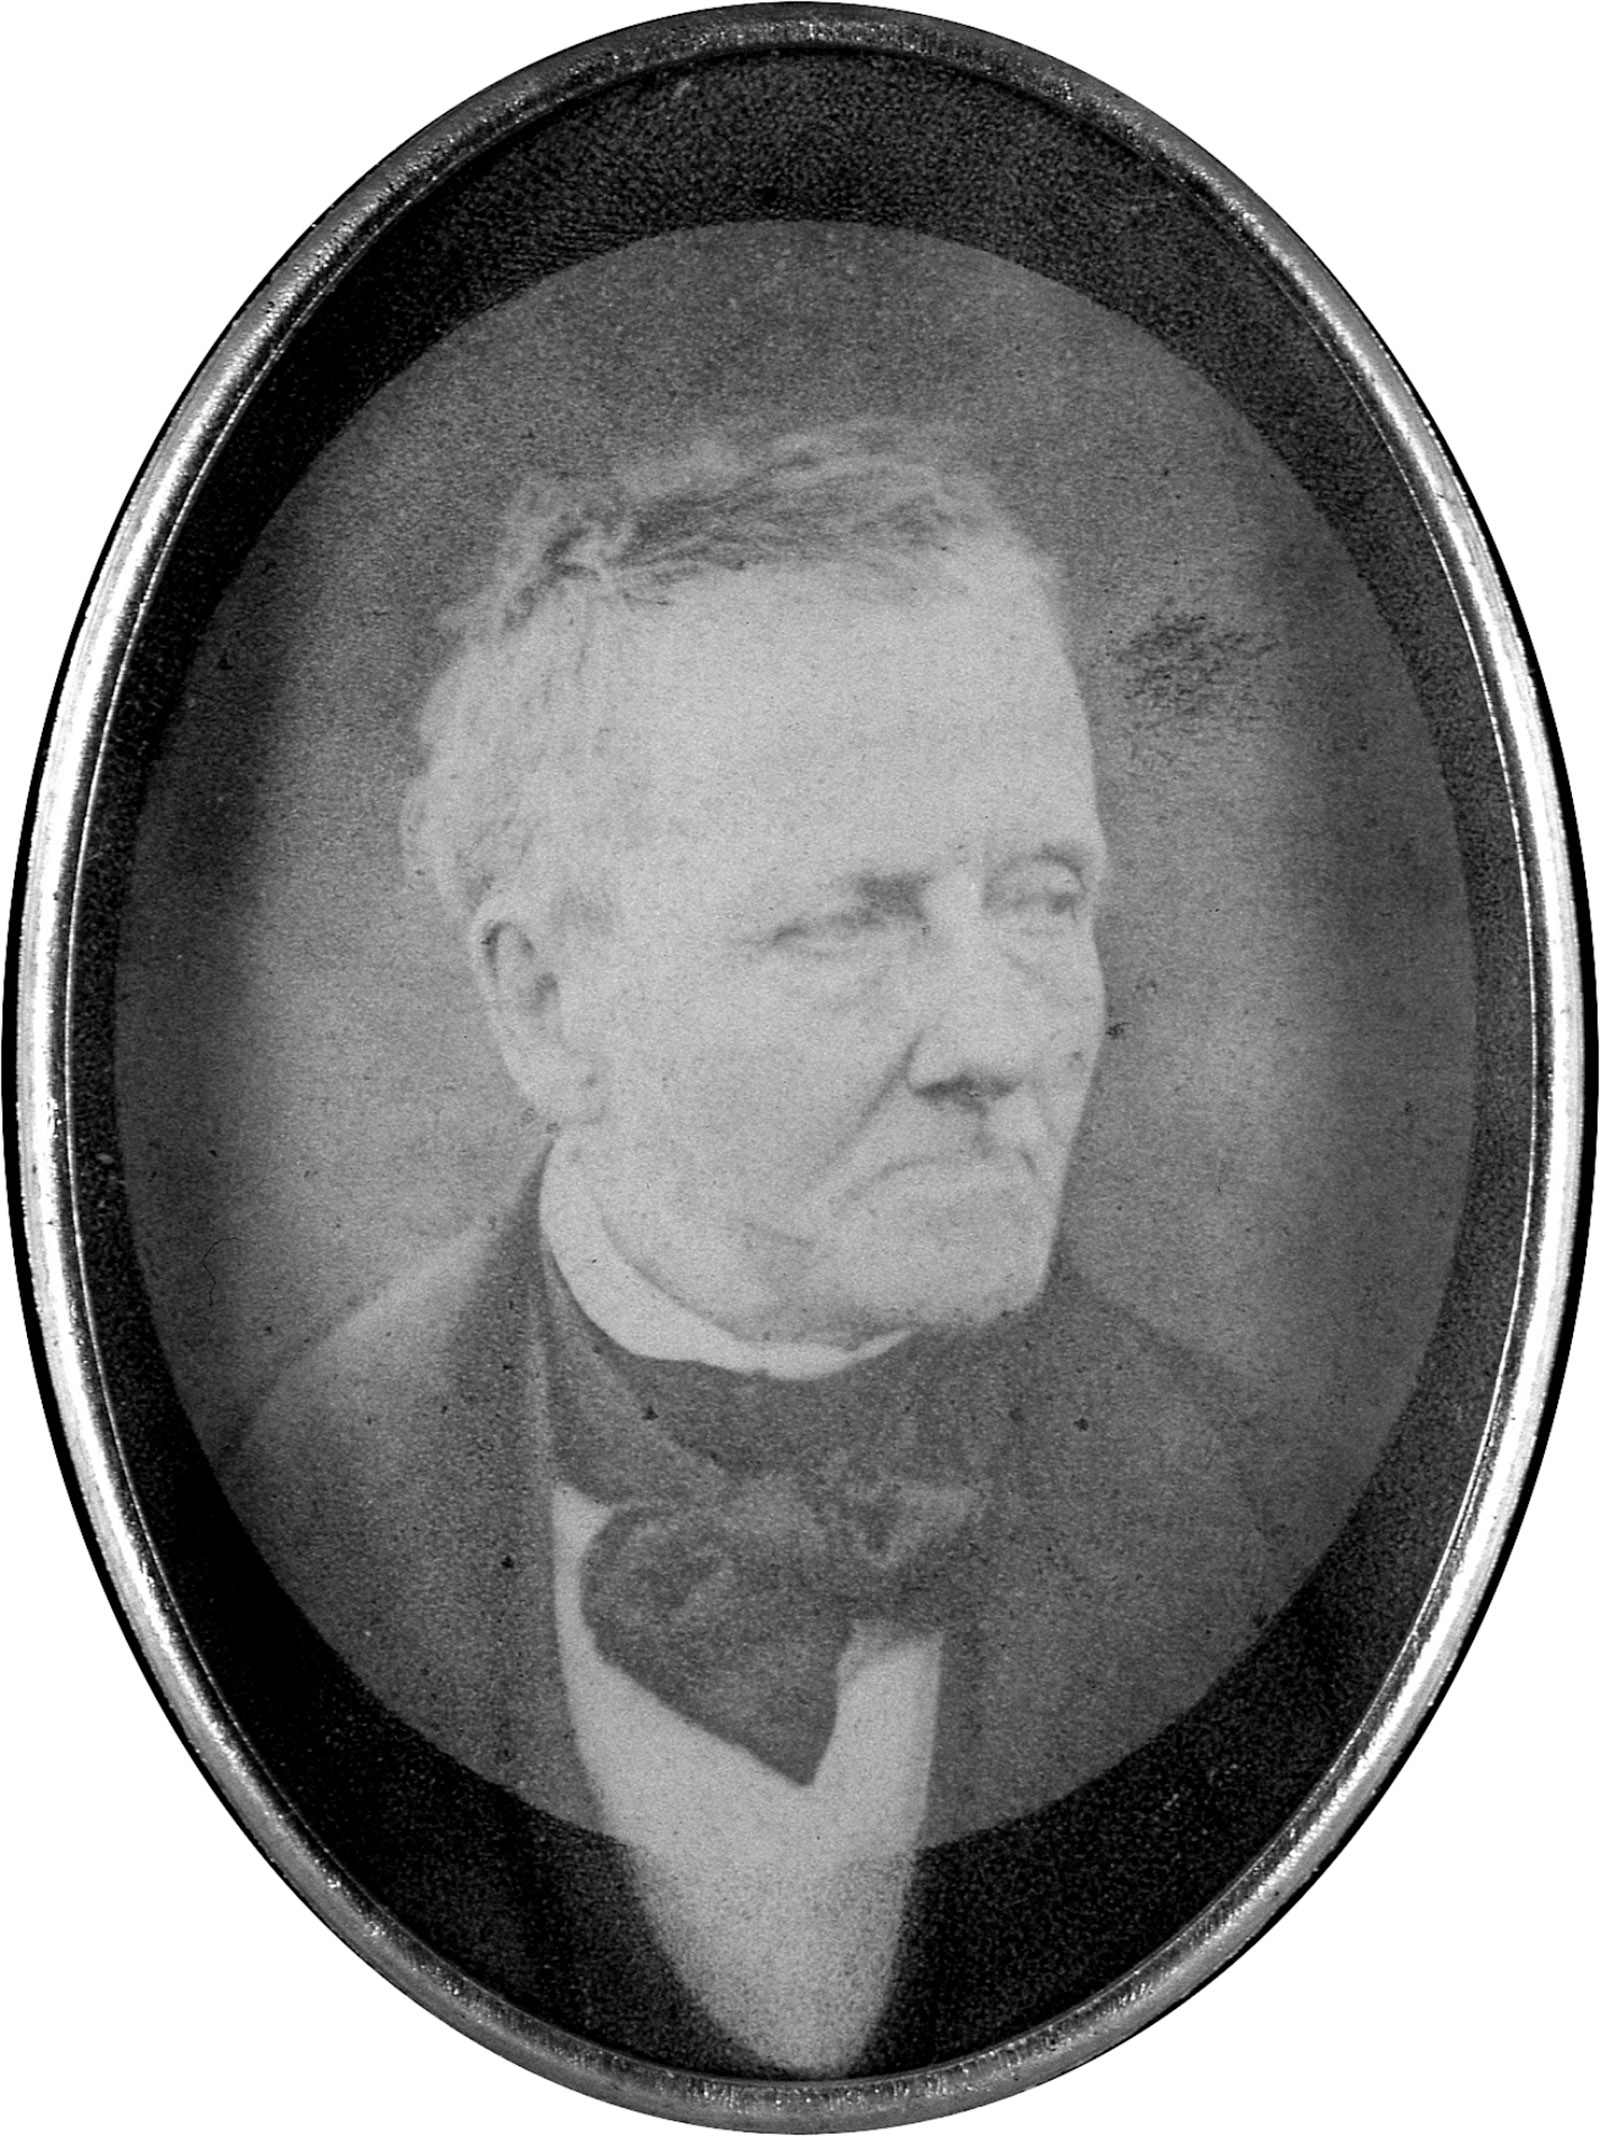 Thomas De Quincey; according to Frances Wilson in Guilty Thing, he ‘was the only Romantic to have had his photograph taken’